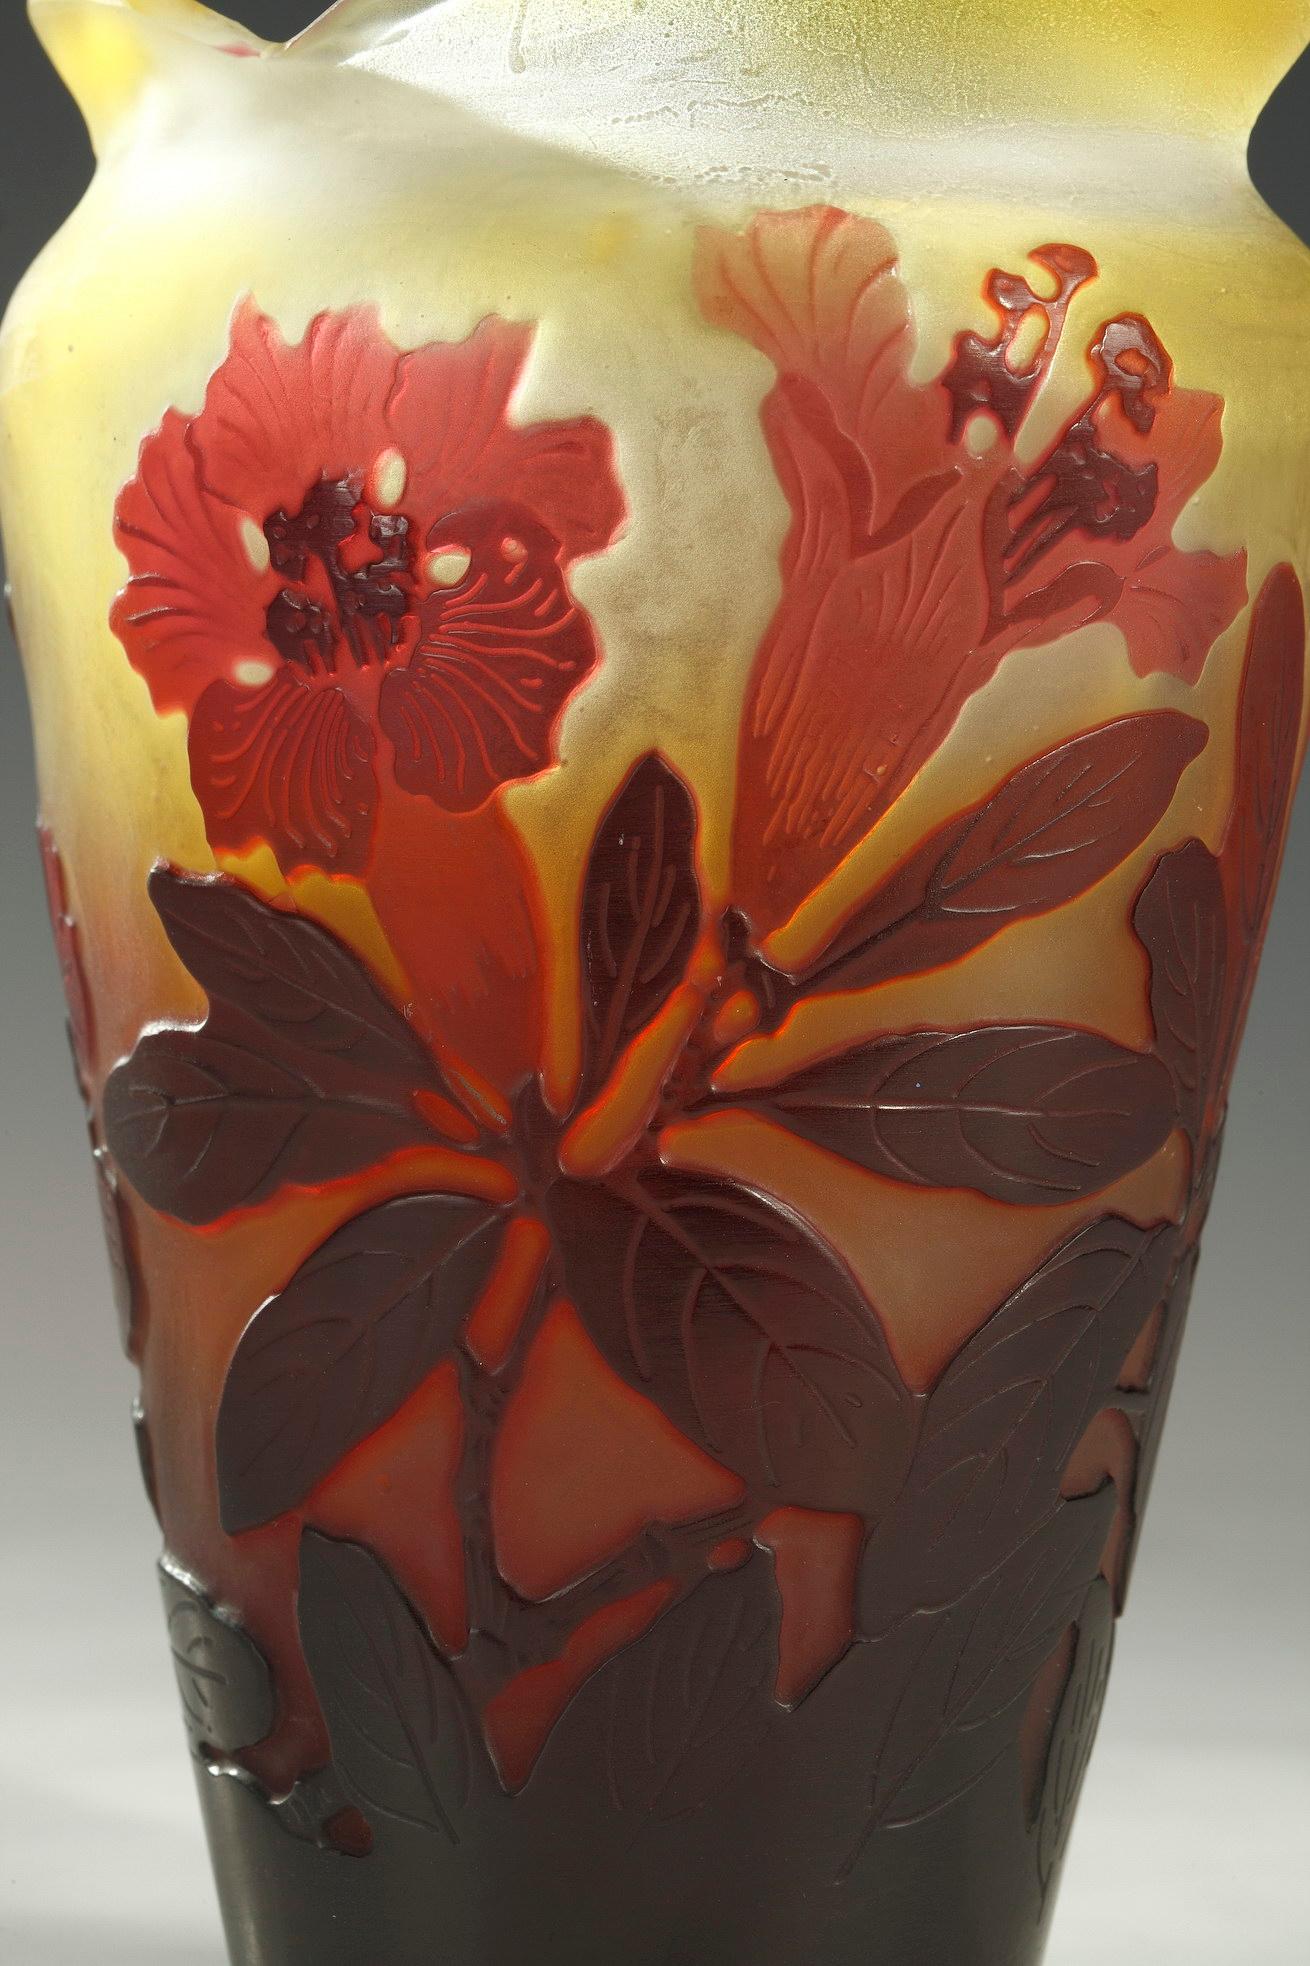 Signed Gallé

Charming flared neck vase in multilayer acid-etched glass, in pinkish-yellow tones and decorated with lilies.

Emile Gallé (Nancy, 1846-1904), as a ceramist, carpenter and glassmaker, is one of the founding artists of Art Nouveau.